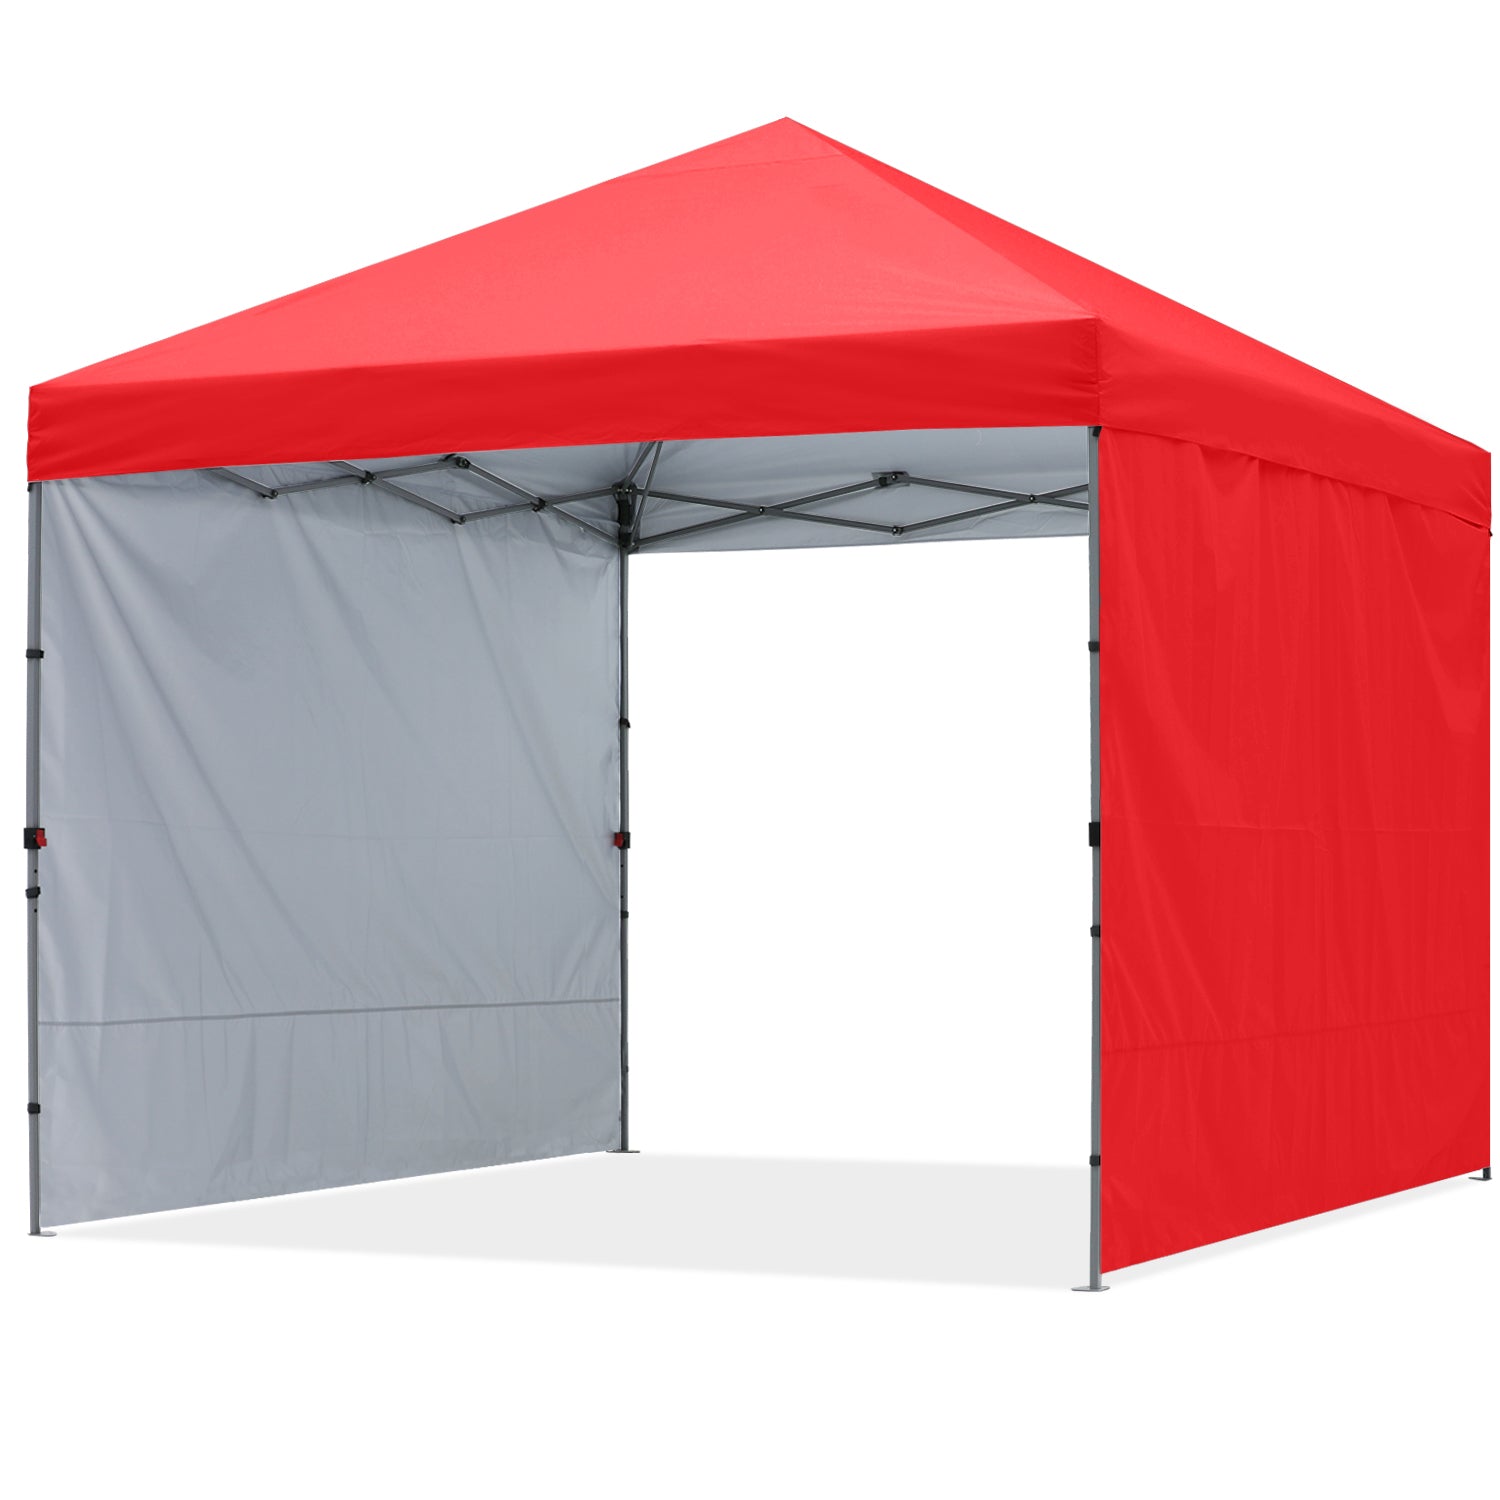 Outdoor Easy Pop up 10x10/8x8/6x6 Canopy Tent With 2 Sun Walls